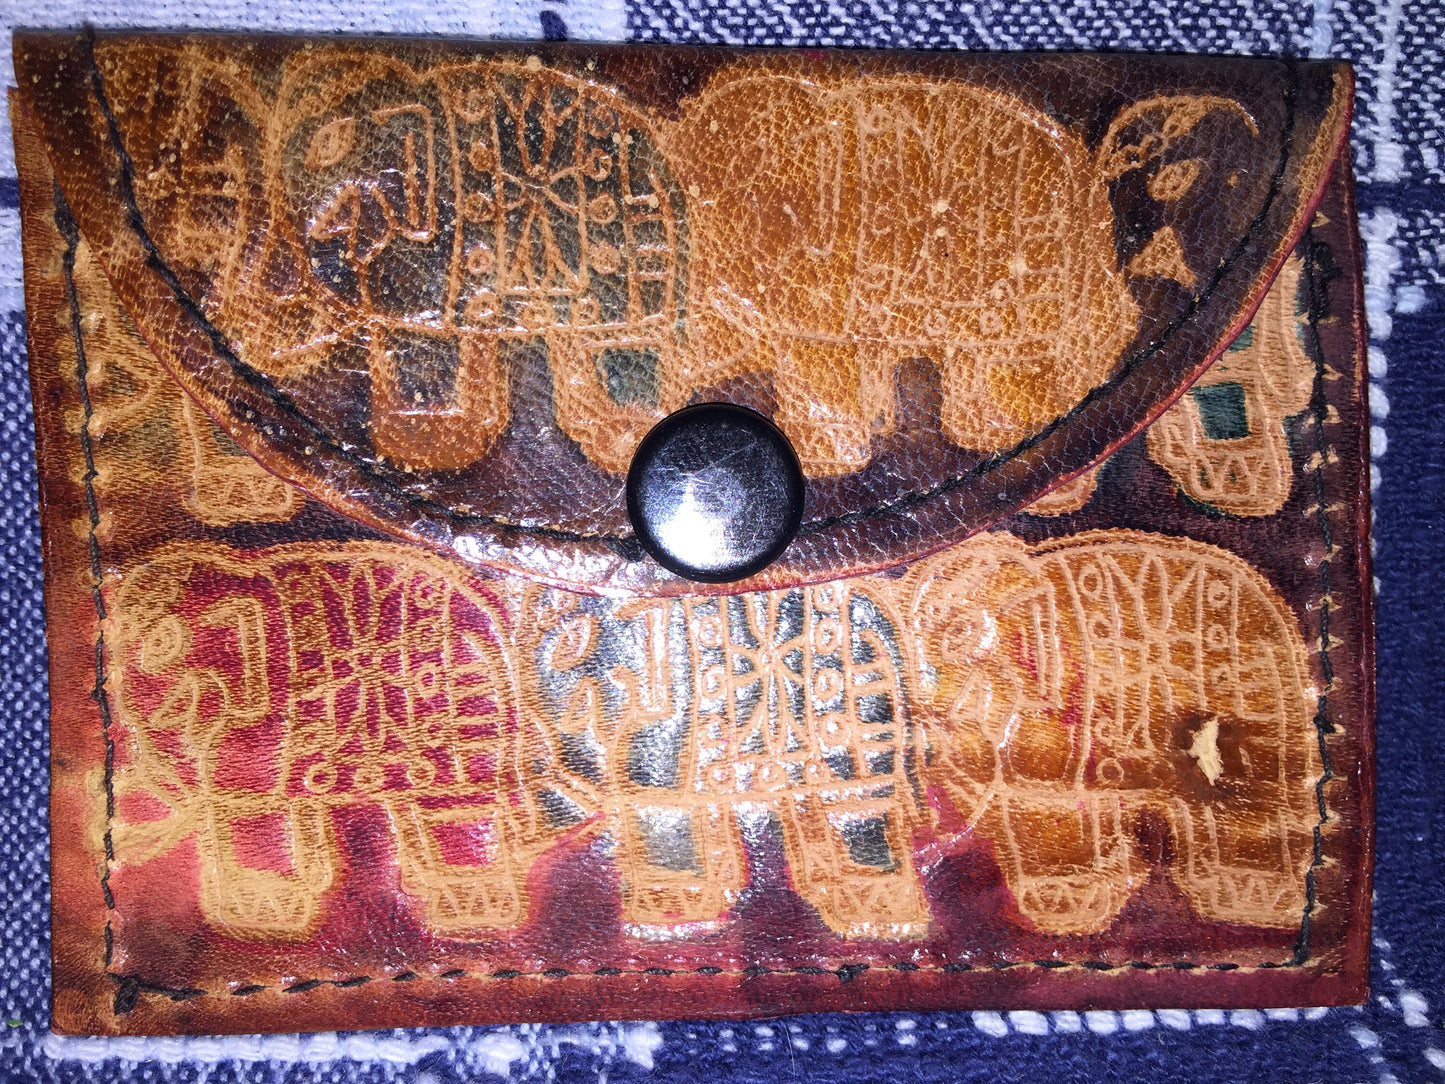 Elephants, Engraved and Stained Vintage Collectible Coin Purse Handmade Leather